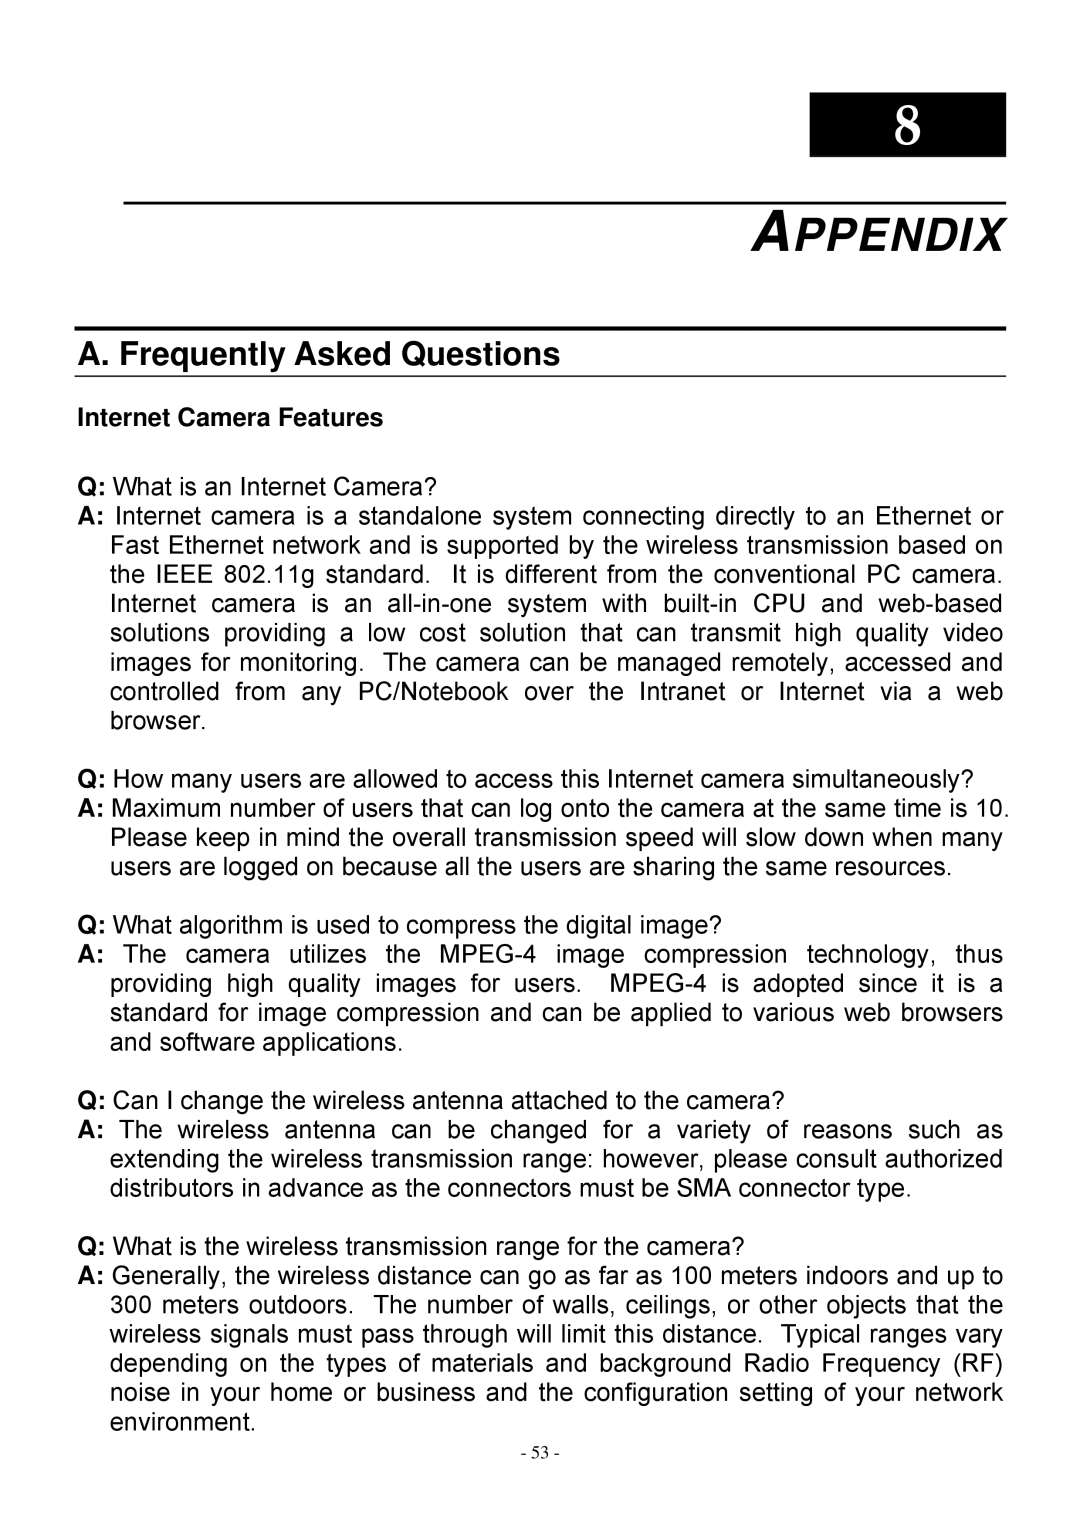 MicroNet Technology SP5530 user manual Appendix, Frequently Asked Questions, Internet Camera Features 